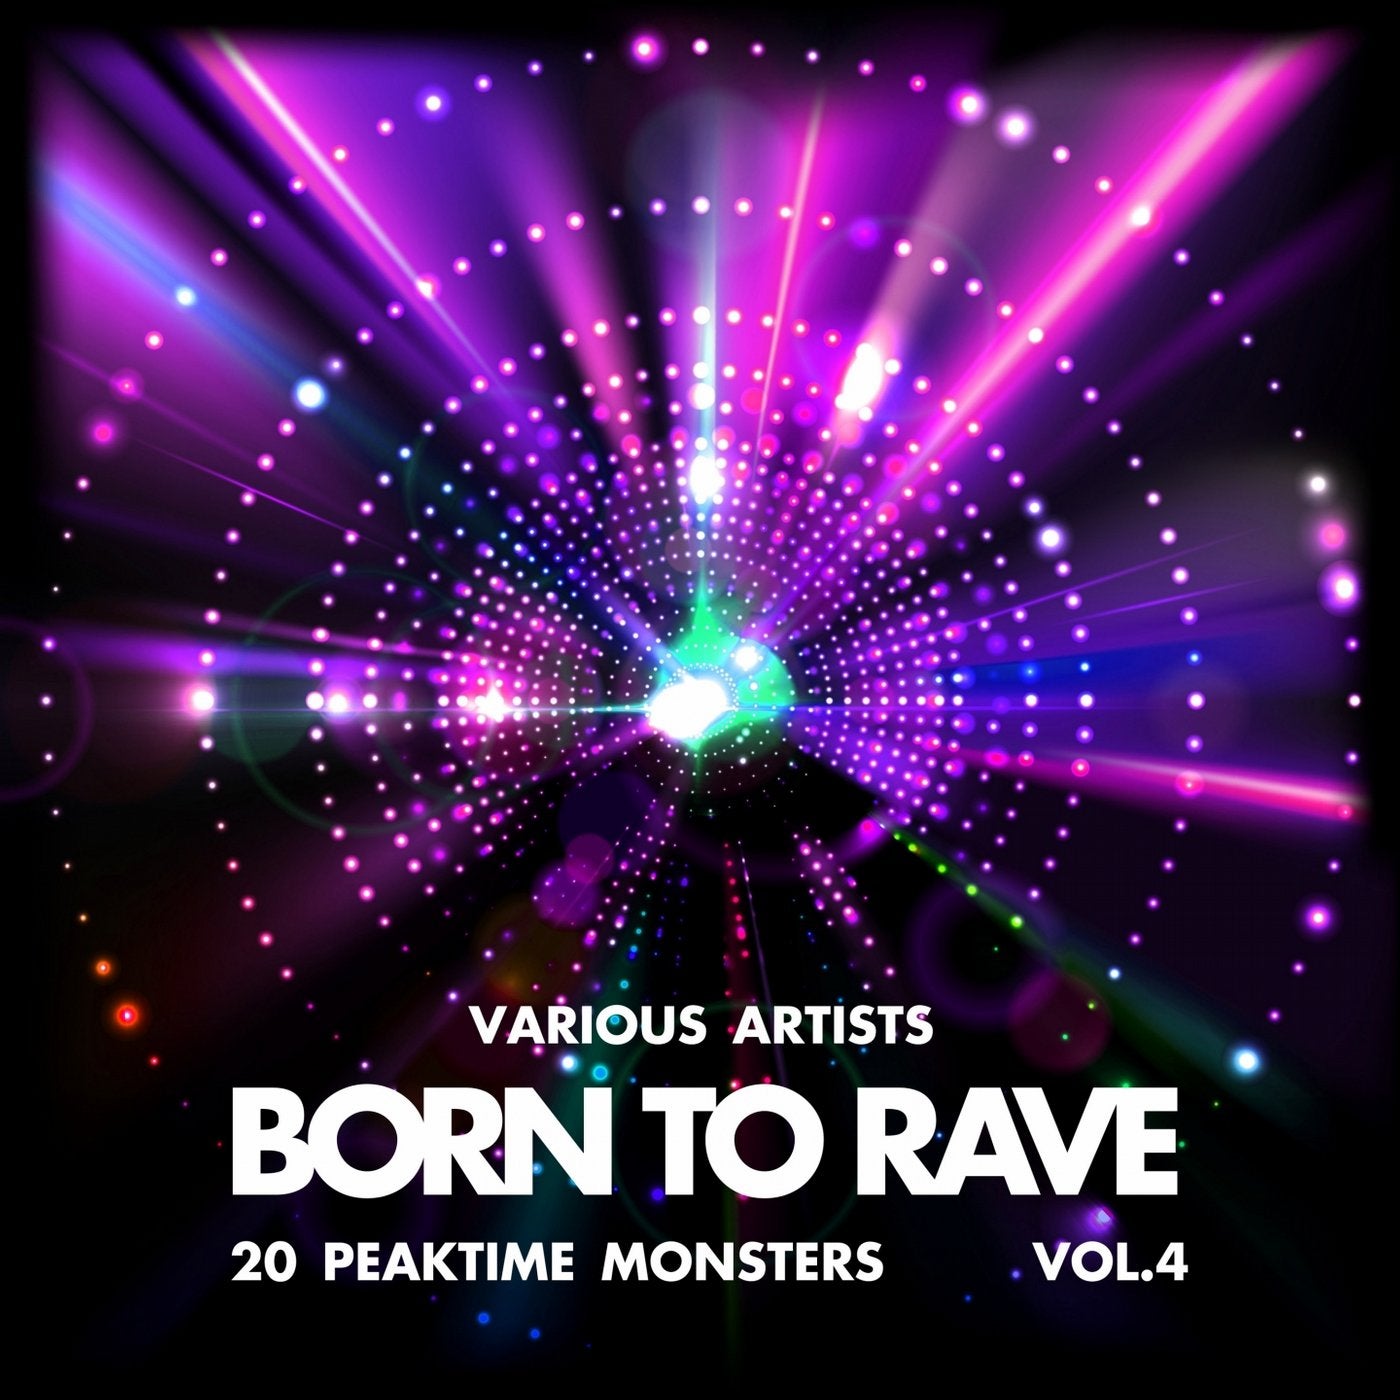 Born to Rave (20 Peaktime Monsters), Vol. 4